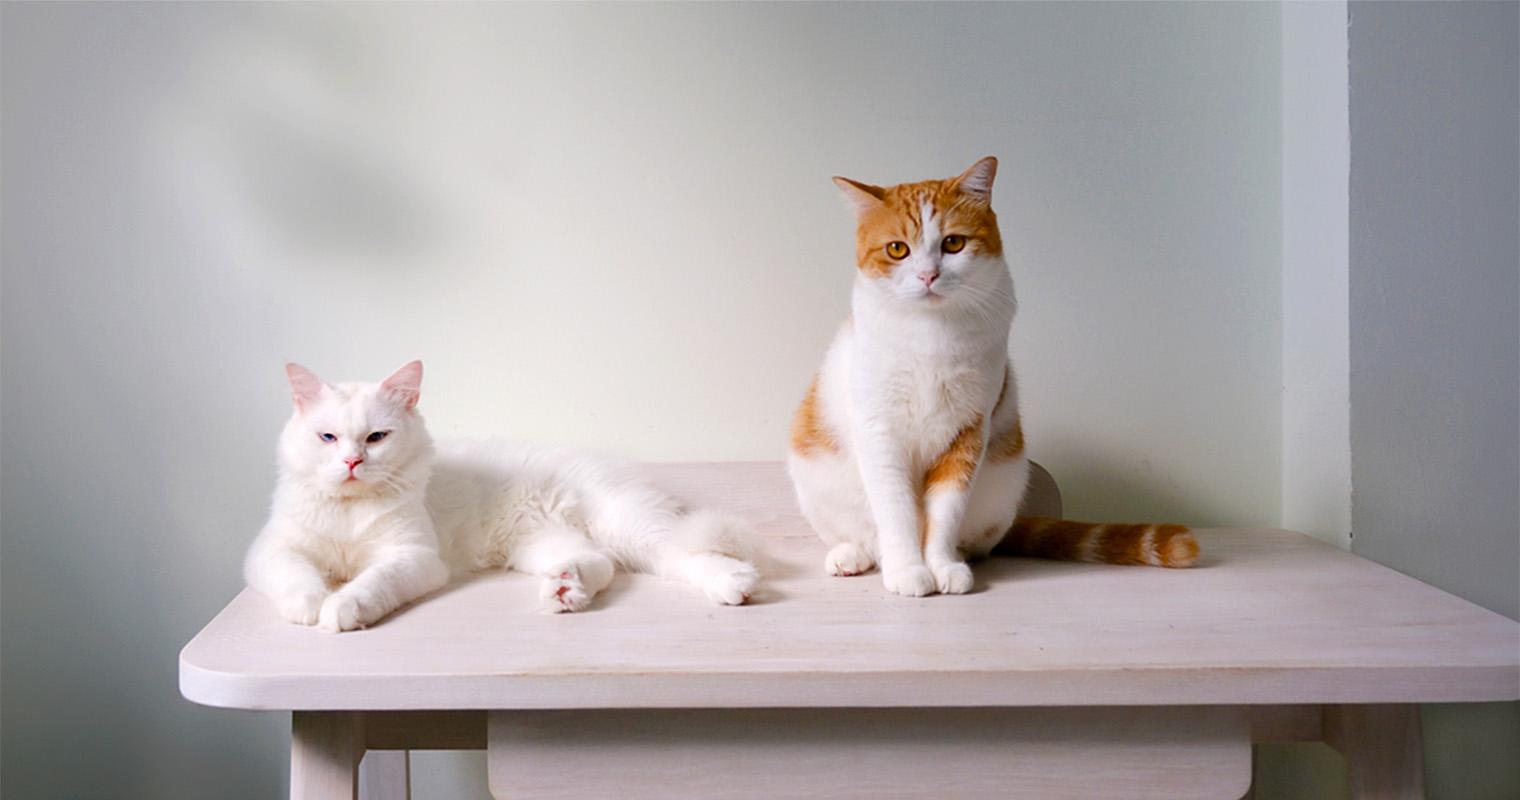 Male vs Female Cats: Which Cat Should I Adopt?